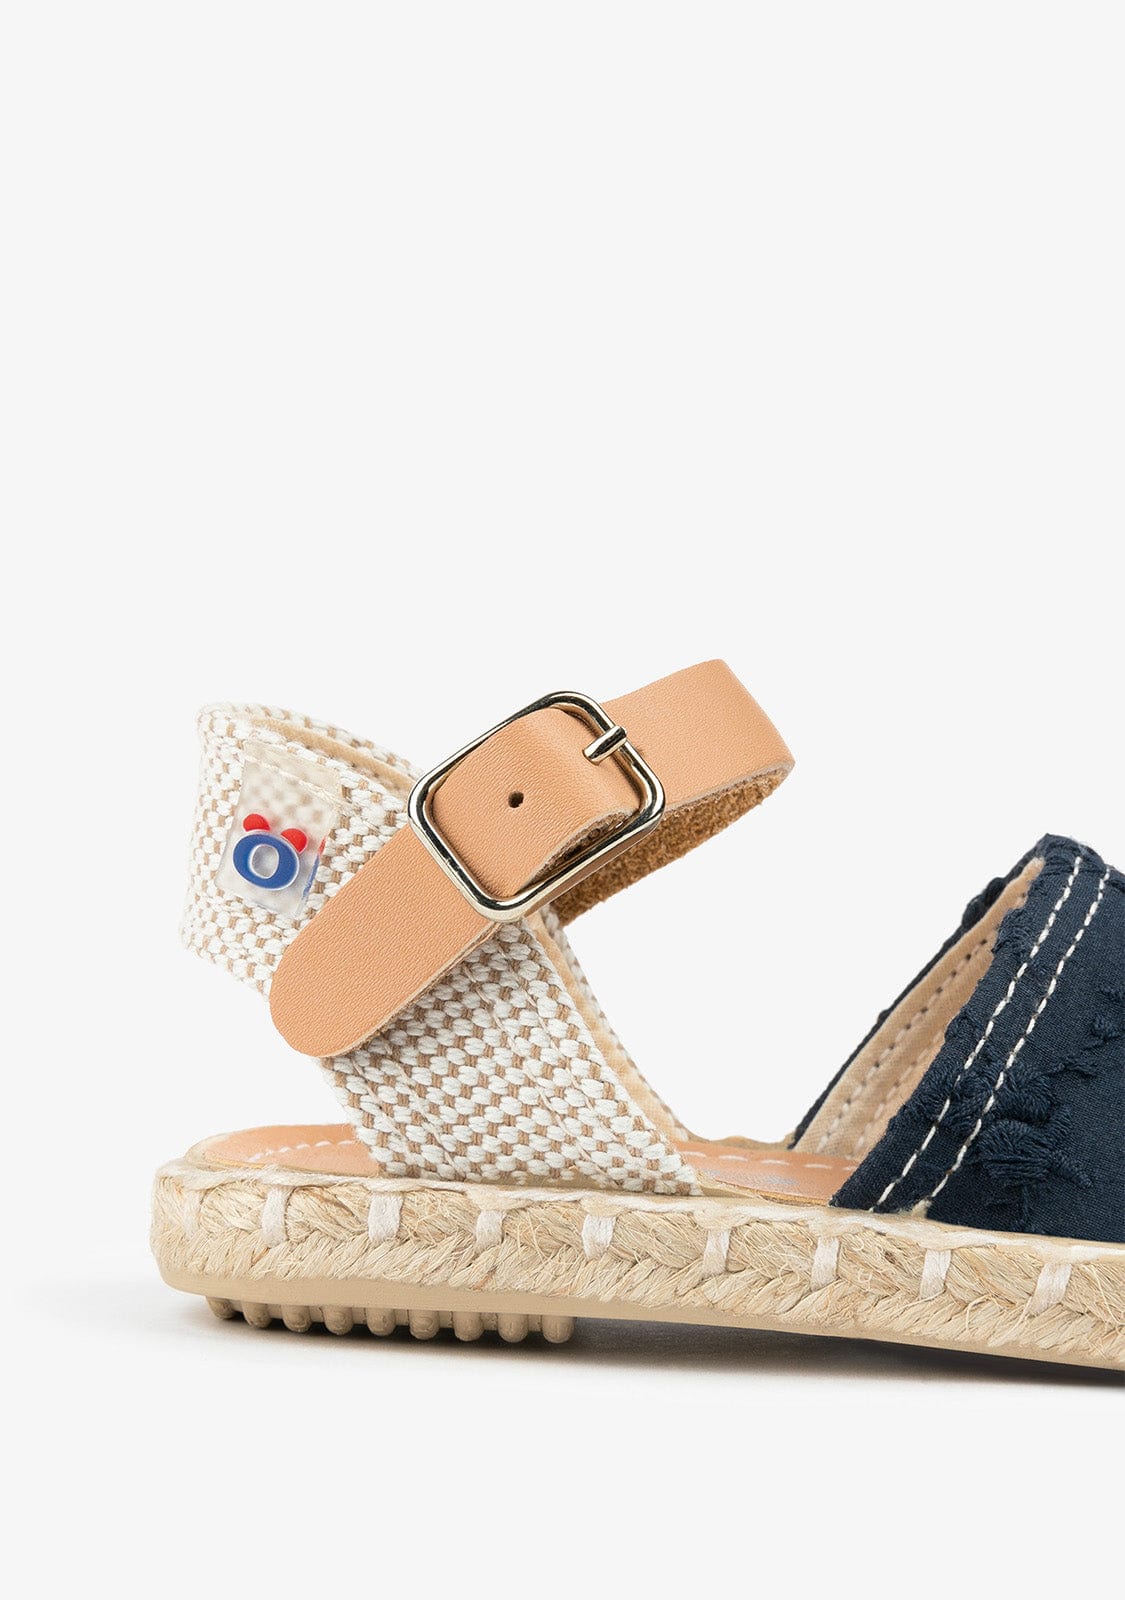 OSITO Shoes Baby's Navy Denim Embroidery Espadrilles